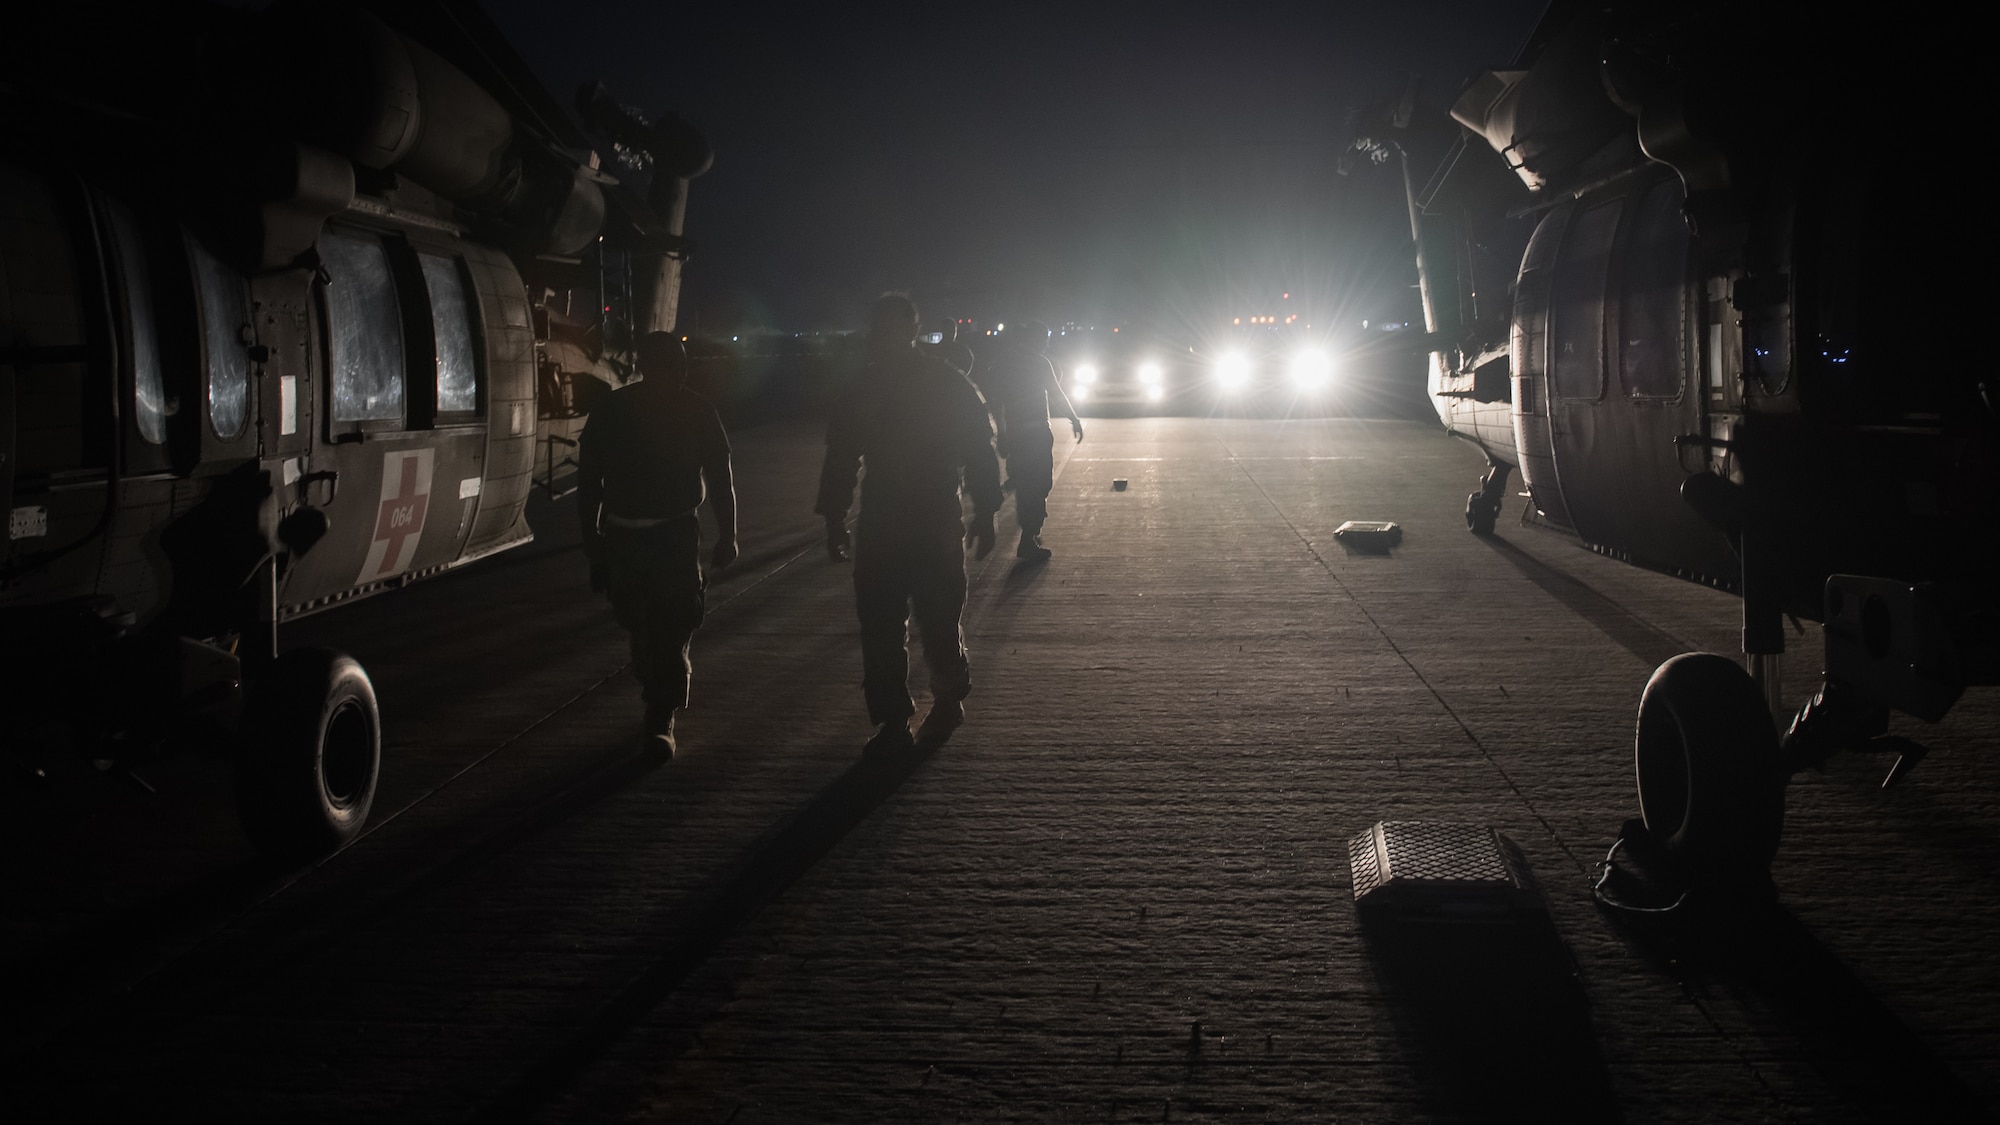 U.S. Airmen and Soldiers prepare to perform a joint inspection on two U.S. Army UH-60 Black Hawk helicopters at Ali al Salem Air Base, Kuwait, Aug. 9, 2019. Service members assigned to the 386th Expeditionary Logistics Readiness Squadron and the 8-229th Assault Helicopter Battalion inspect the Black Hawks to ensure they're airworthy to load onto U.S. Air Force C-17 Globemaster III aircraft. The Black Hawks will then undergo transport to a location within the U.S. Central Command area of responsibility. Inspectors perform a number of functions including measuring and weighing the helicopter, thoroughly assessing the aircraft and unloading its cargo to ensure it meets the safety requirements for transport. (U.S. Air Force photo by Tech. Sgt. Daniel Martinez)